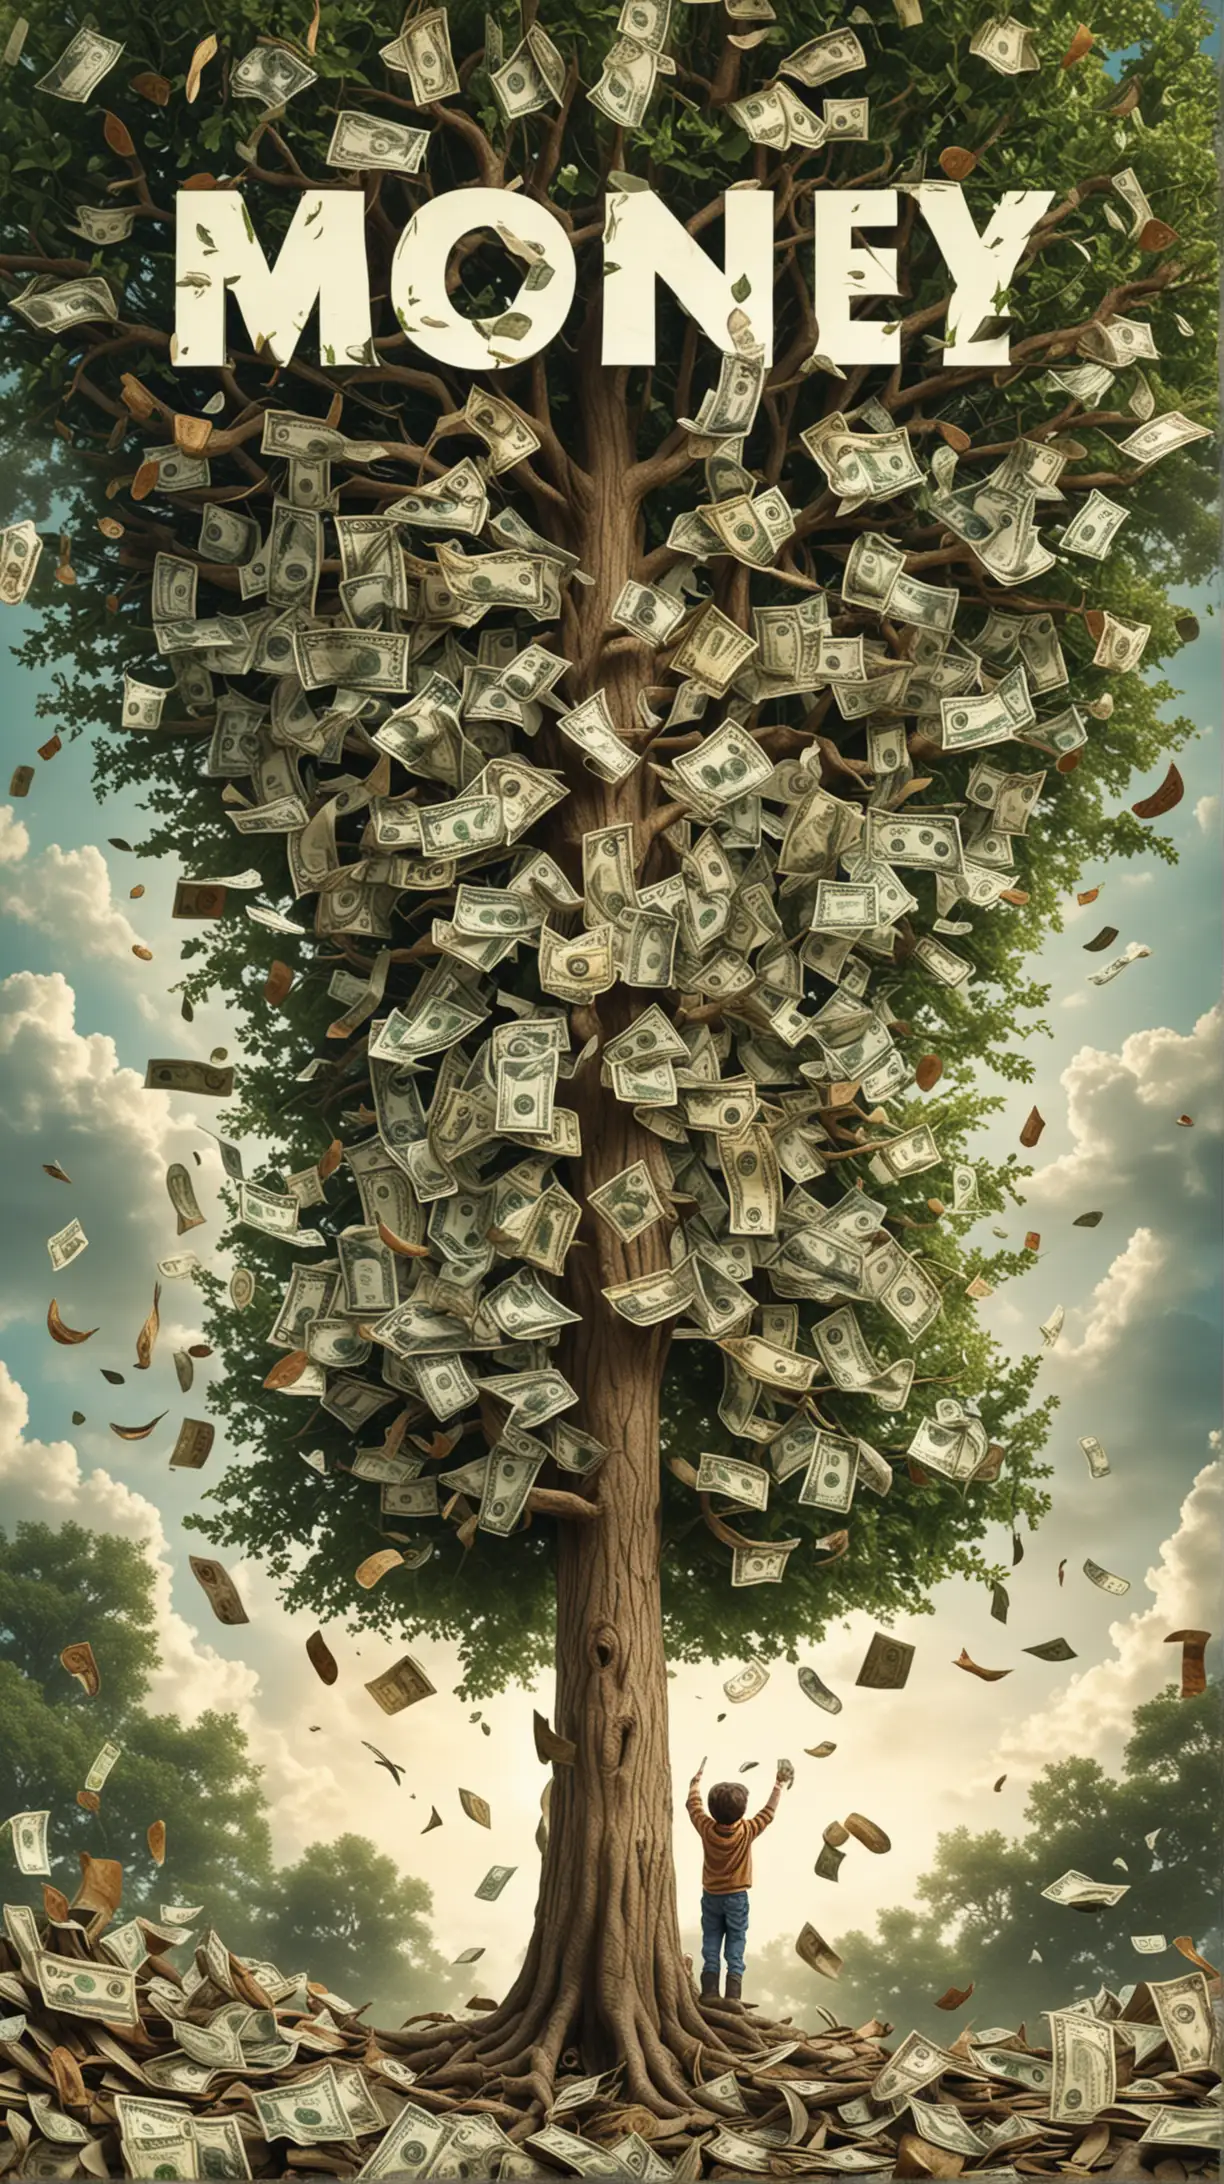 Cover Art showing a tree with money growing on it and a boy reaching from the bottom with his back towards the viewer.